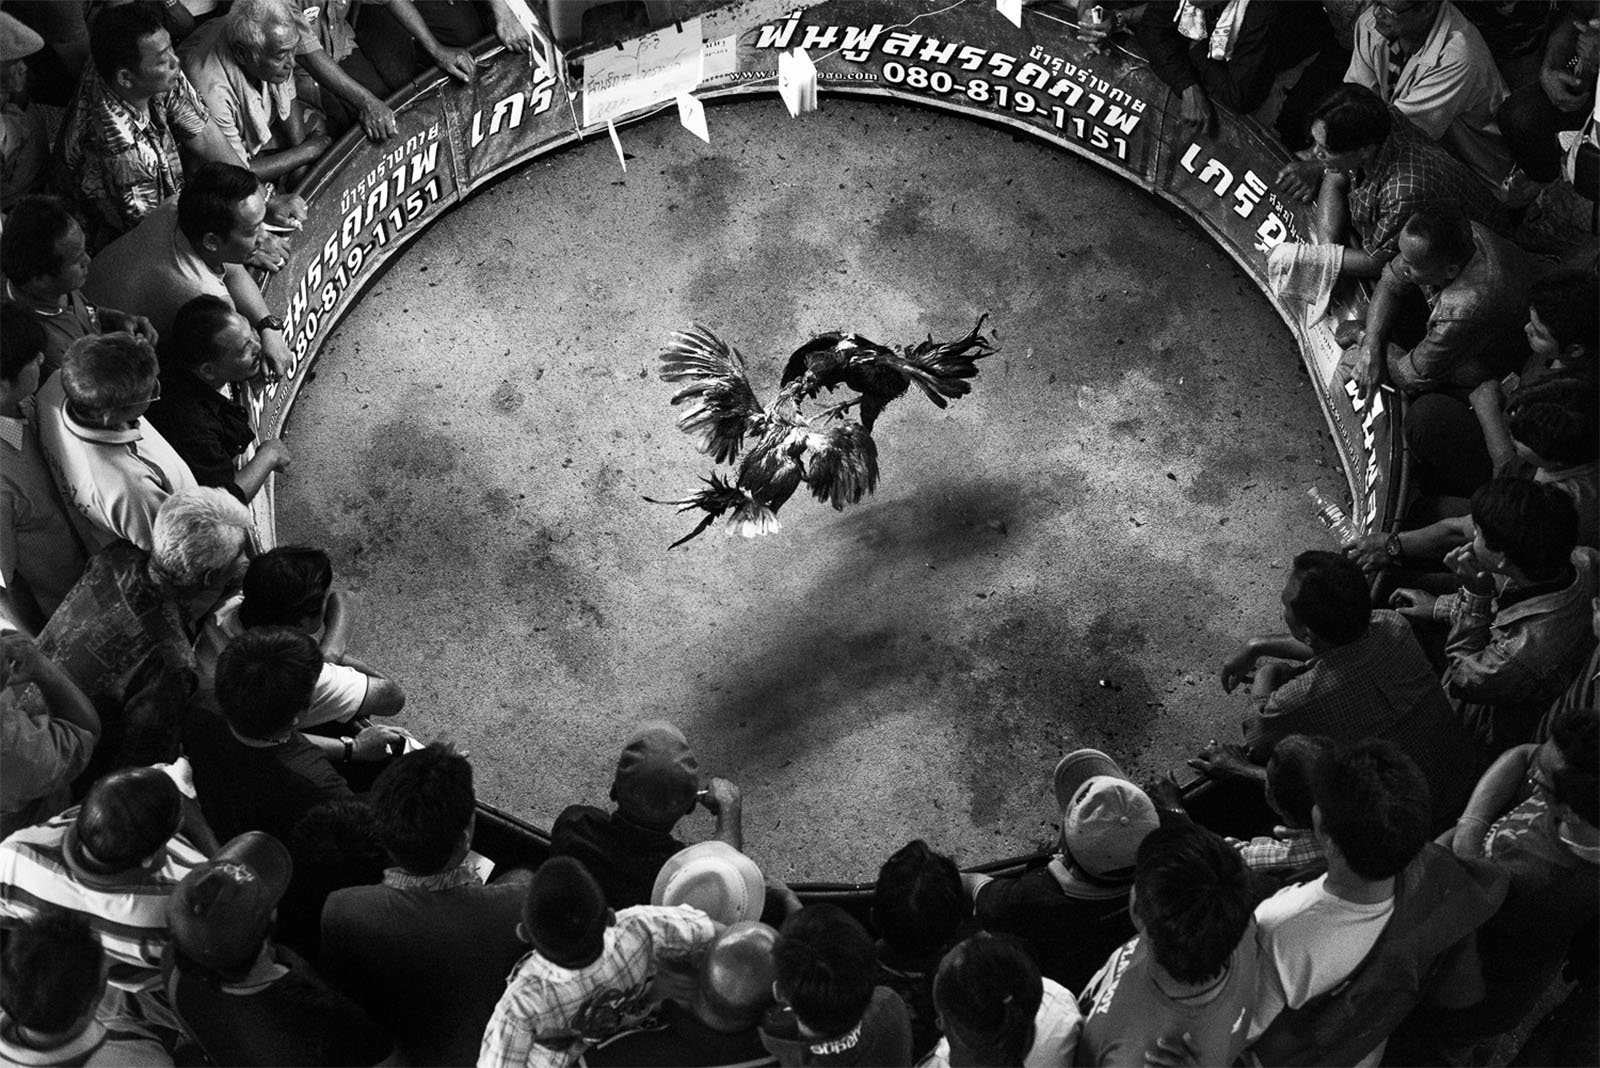 A black and white image of a cockfighting ring surrounded by a large crowd of spectators. Two roosters are engaged in a fight at the center of the ring, and dozens of people are intently watching the event from all sides. Signs in Thai script are visible at the top.